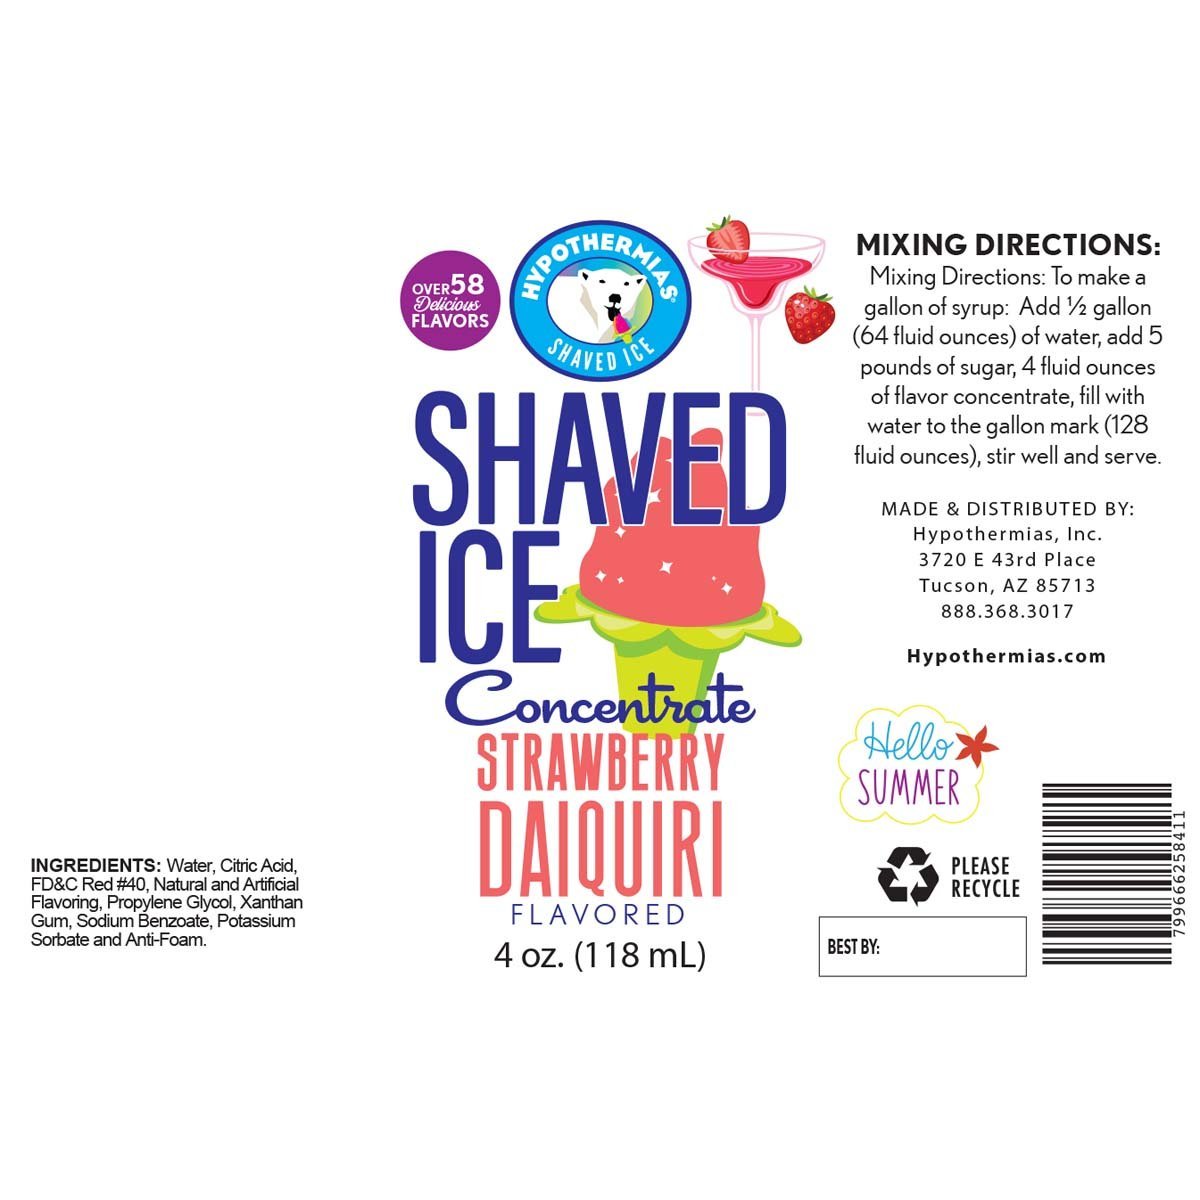 Hypothermias strawberry daiquiri shaved ice or snow cone flavor concentrate ingredient label.